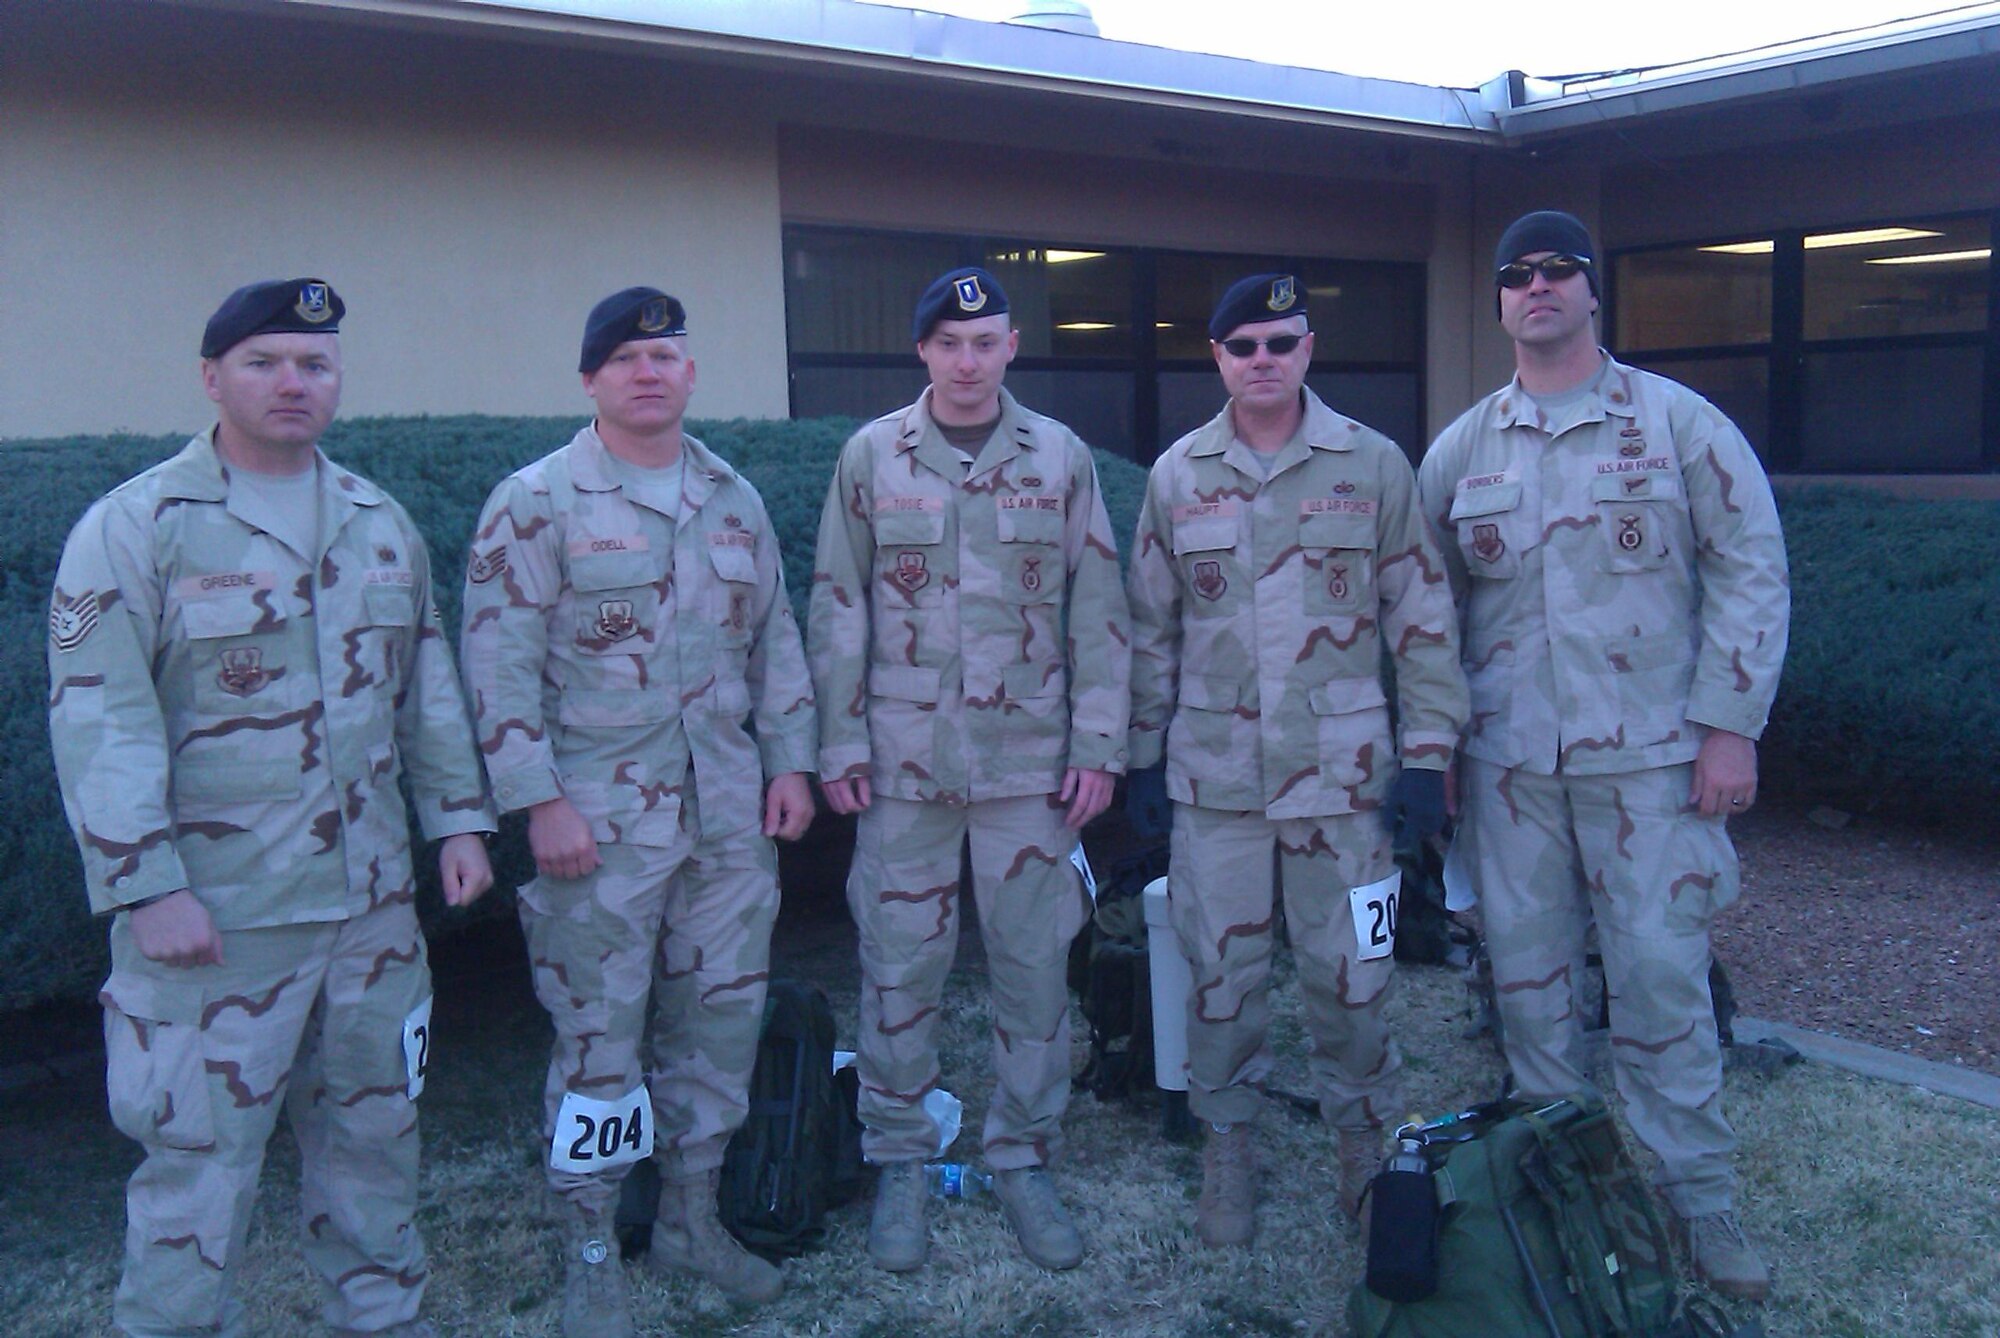 Tech. Sgt. Adam Greene, Staff Sgt. Anthony Odell, 1st Lt. Derek Tosie, Jerry Haupt and Maj. Michael Borders, 56th Security Forces Squadron, pose for a photo prior to beginning the Bataan Memorial Death March at White Sands Missile Range, N.M. March 21. The Desert Combat Uniforms shown are what each wore during their previous deployments. (U.S. Air Force photo courtesy 56th Security Forces Squadron)